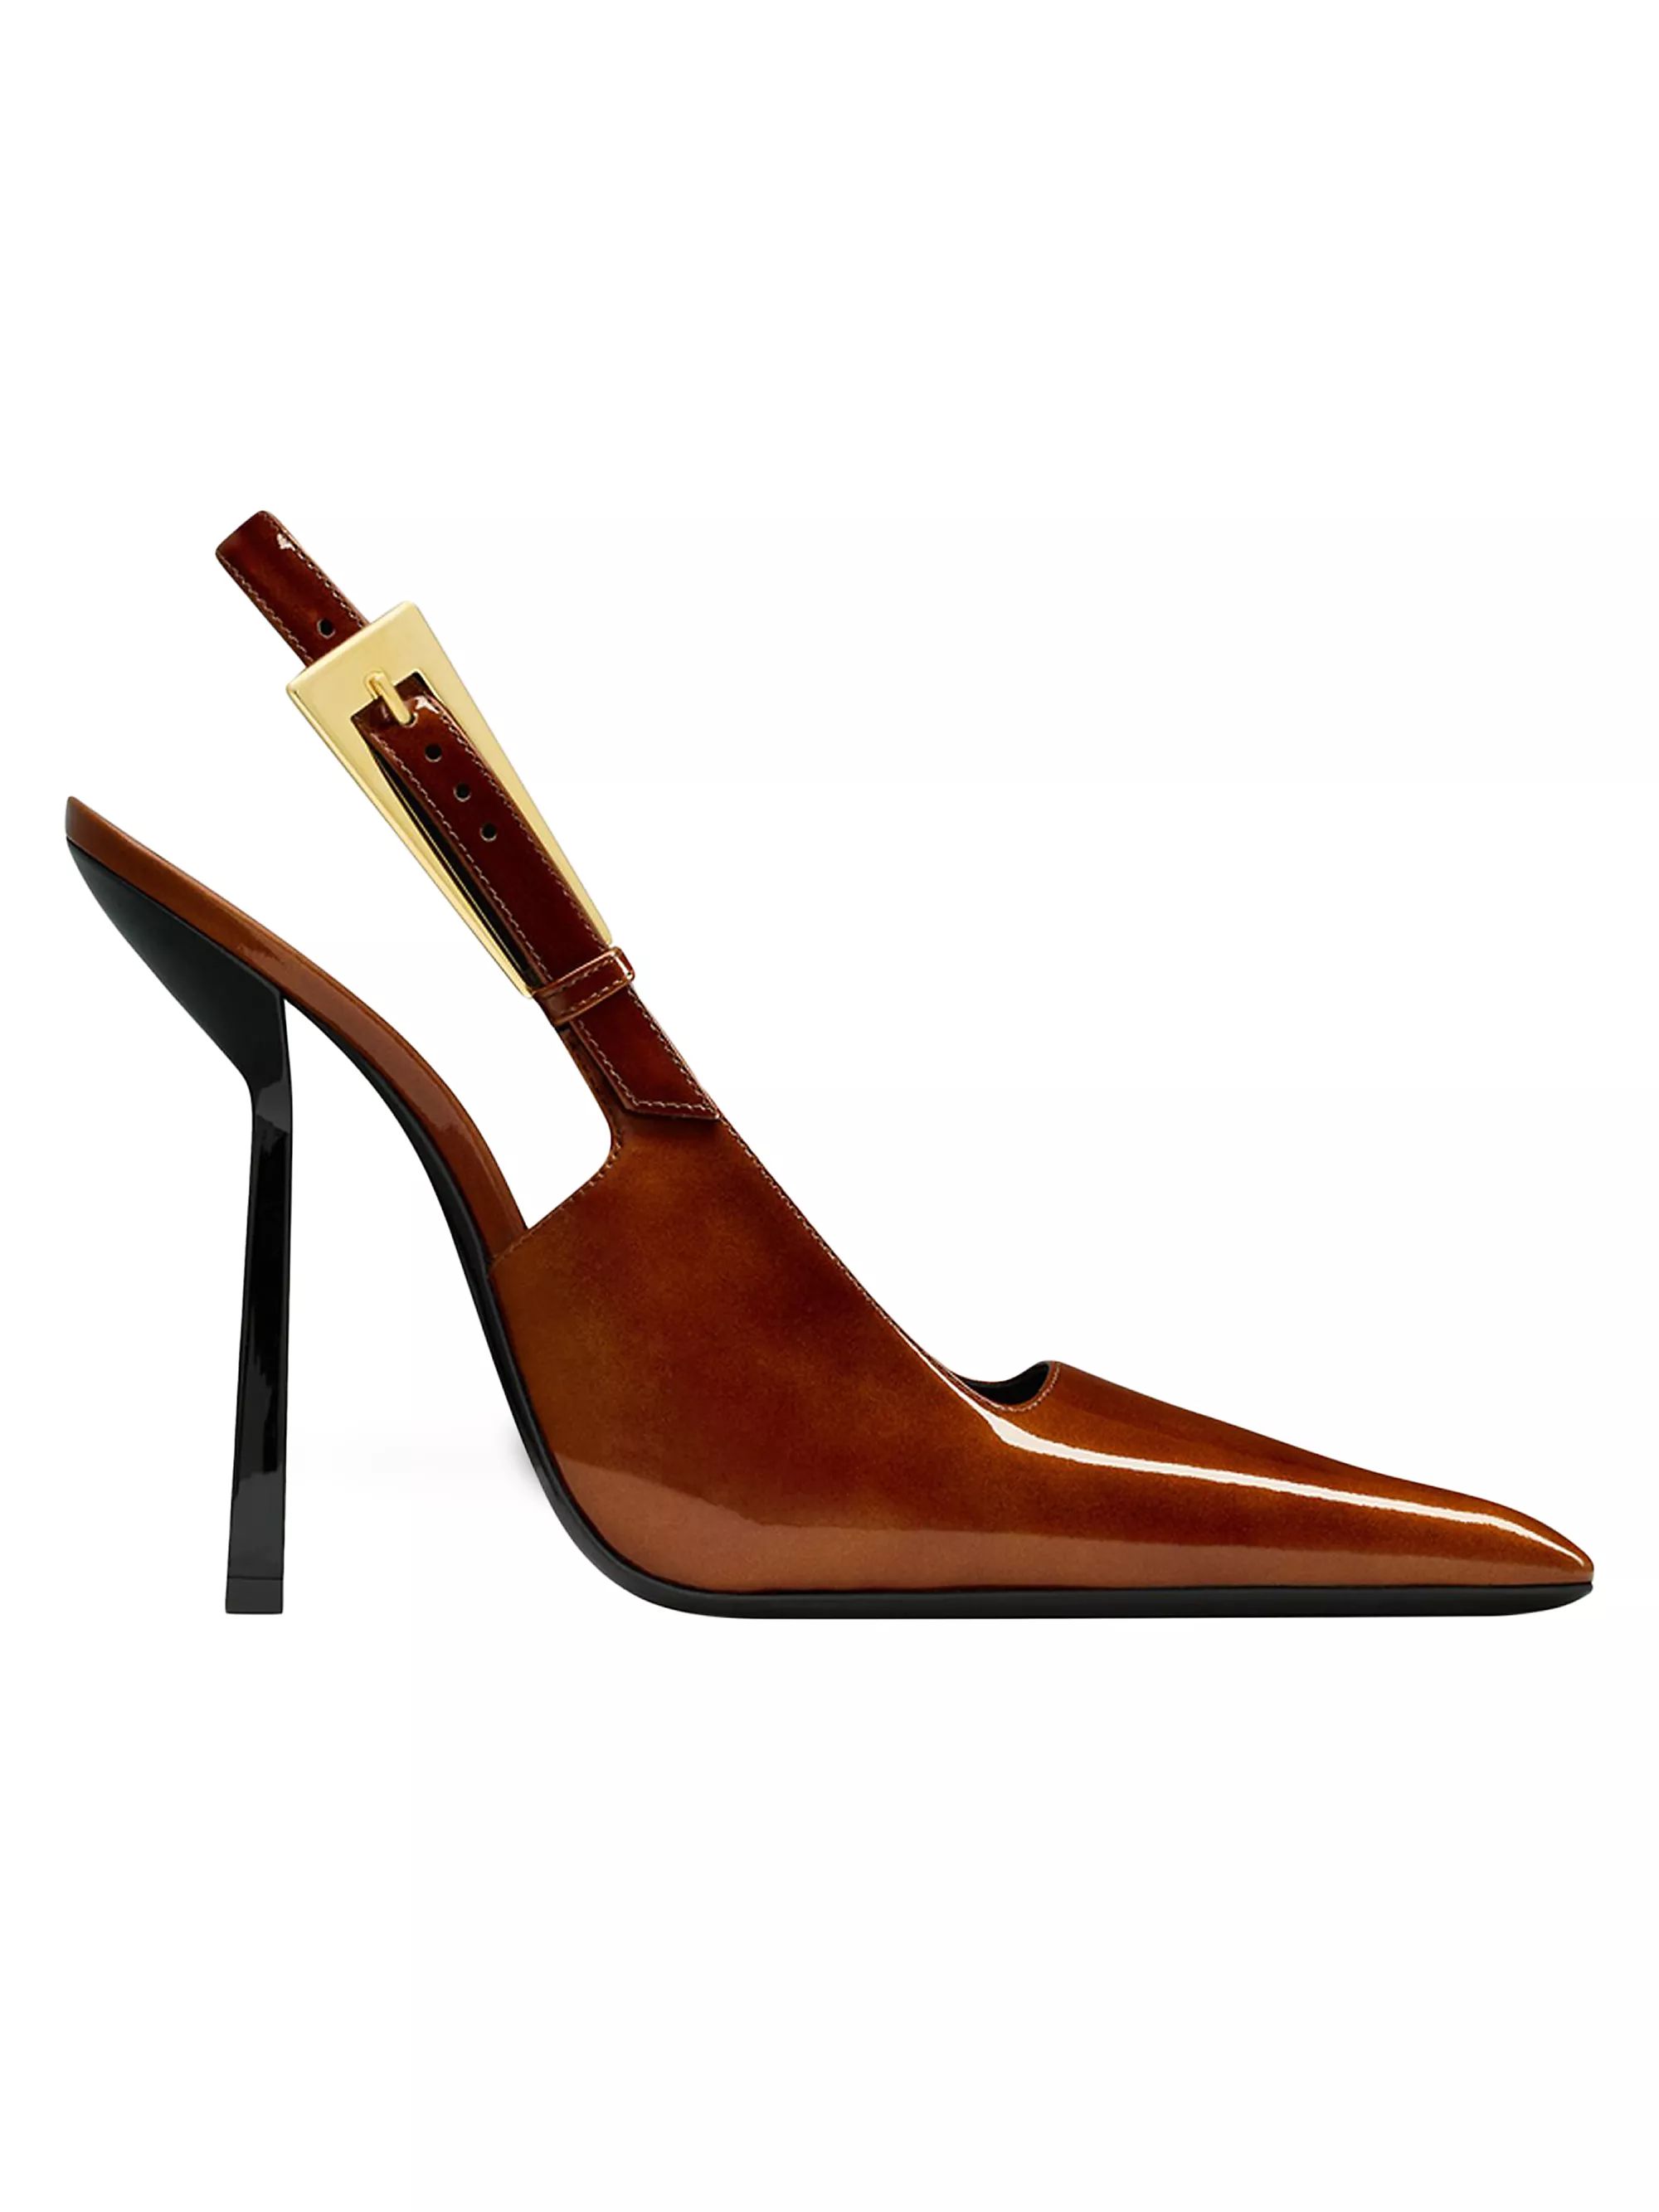 Lee Slingback Pumps In Patent Leather | Saks Fifth Avenue